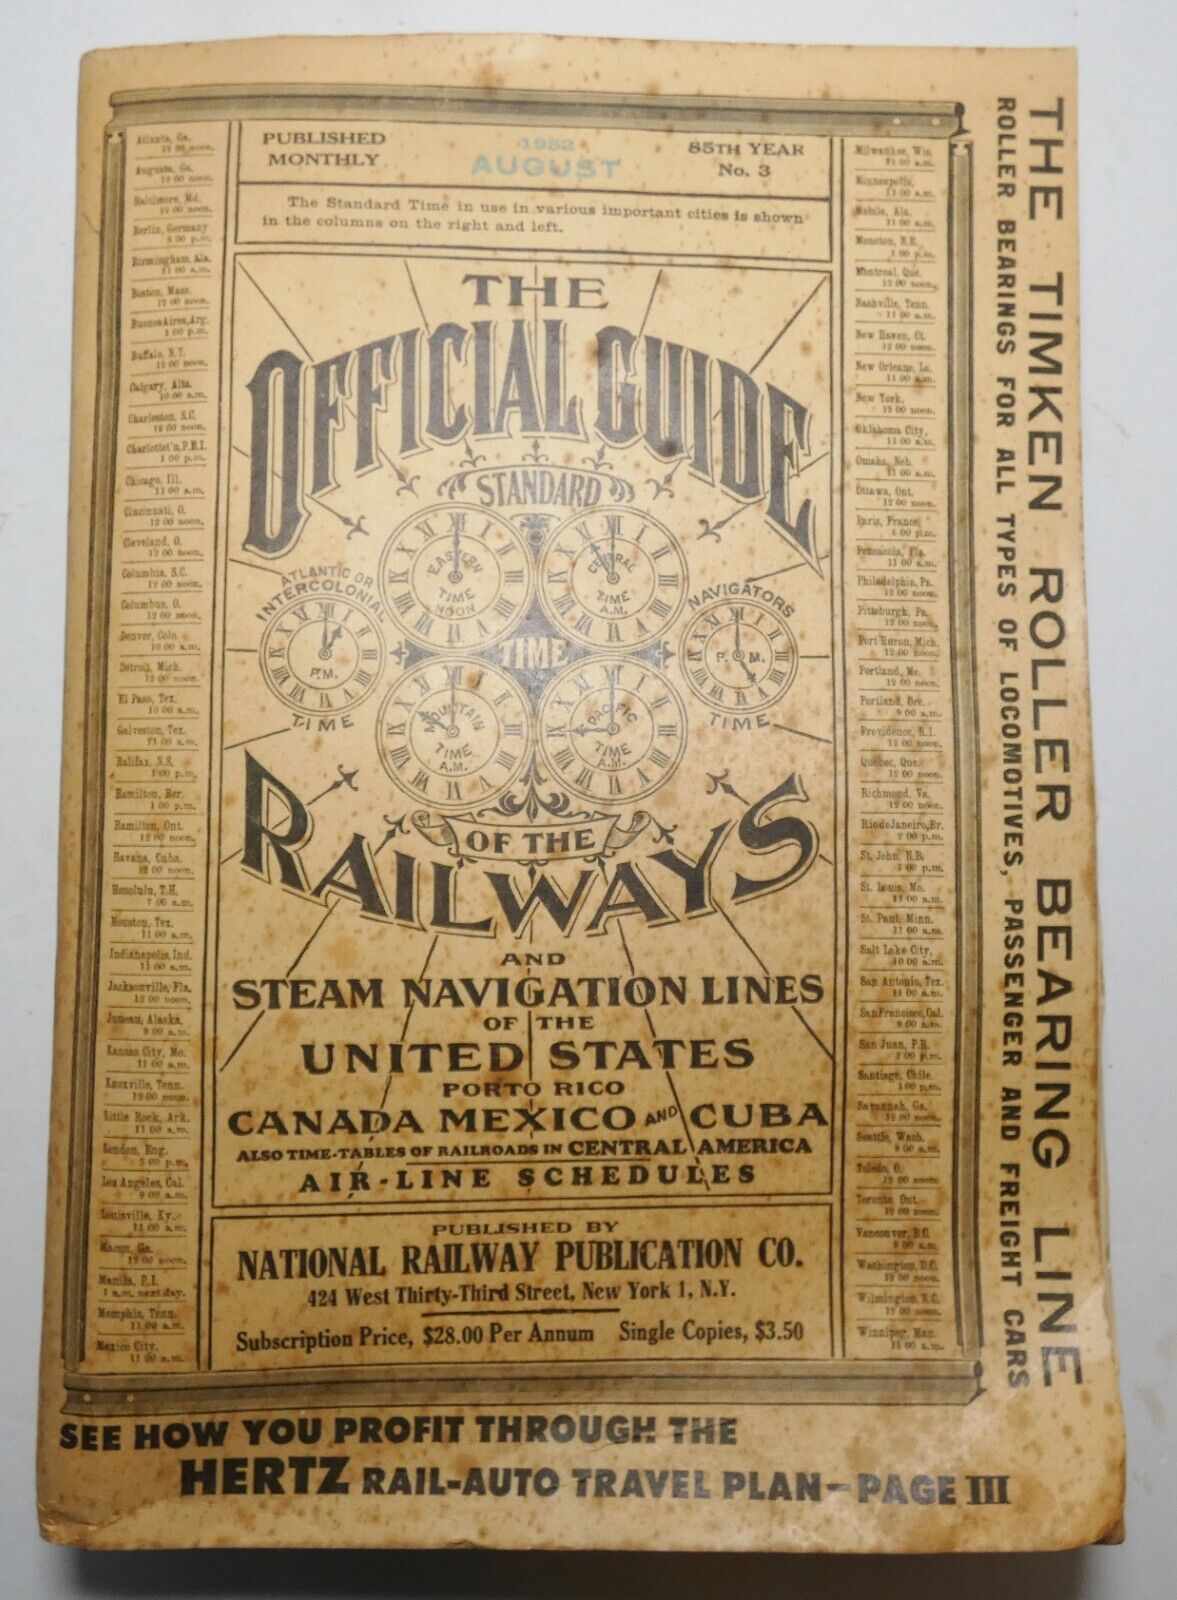 The Official Guide of the Railways and Steam Navigation Lines of the US Aug 1952